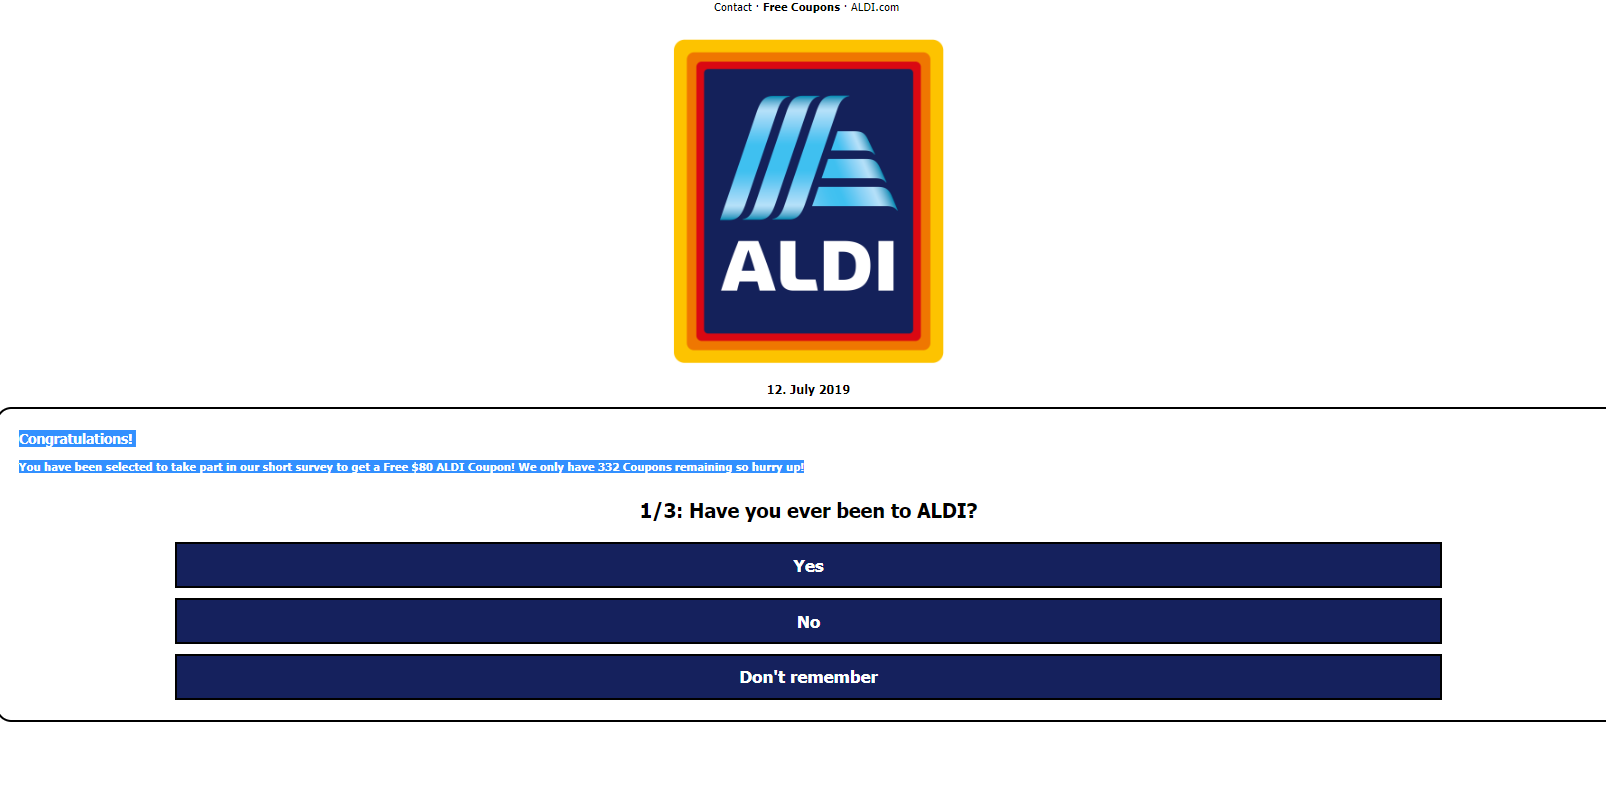 Fake News ALDI Is NOT Giving Free 80 Coupon Per family To Celebrate